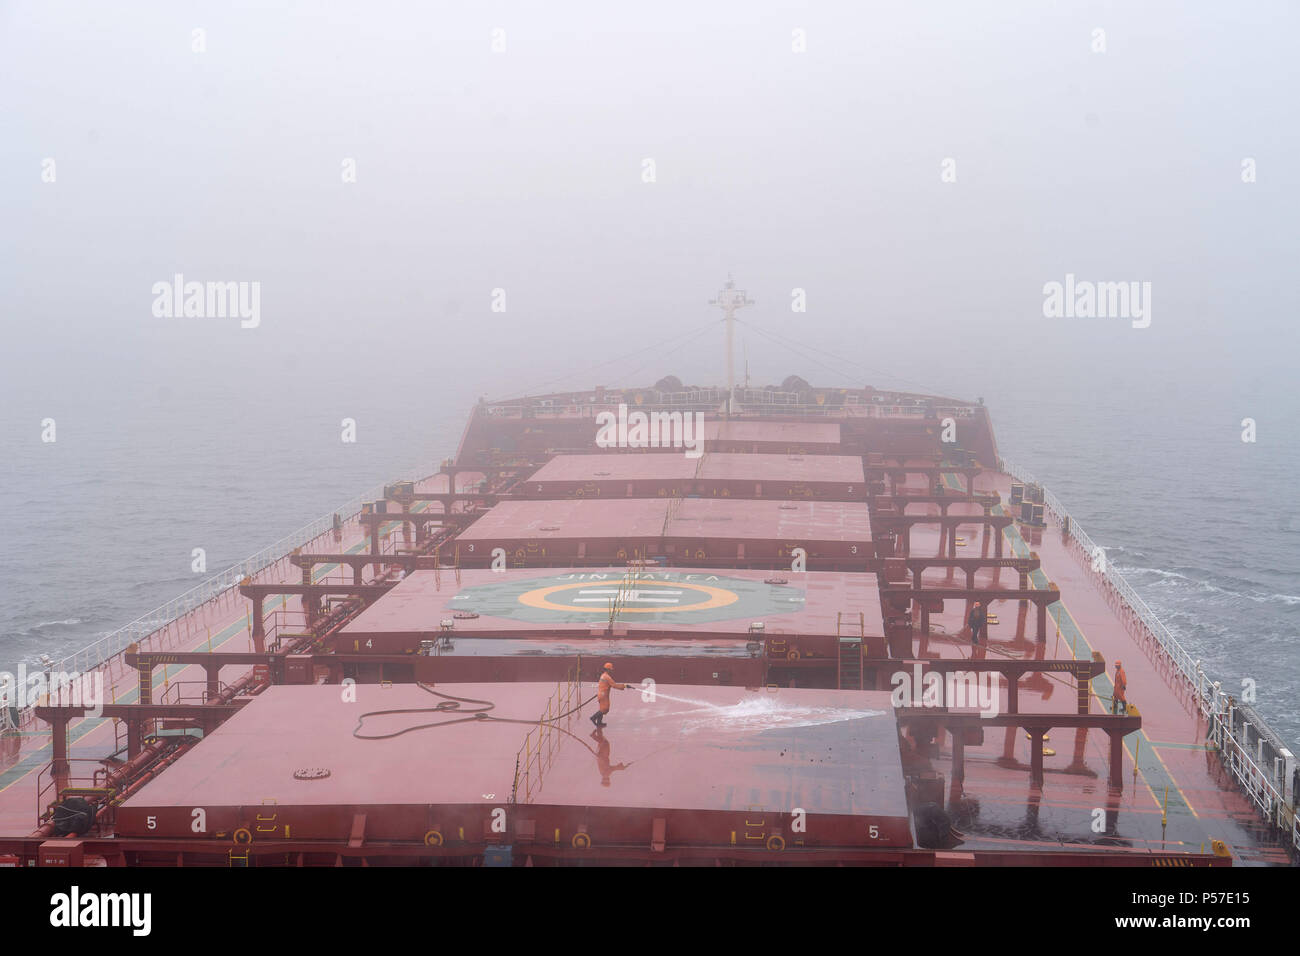 Quanzhou. 20th June, 2018. Sailors clean the deck on the freighter 'Jinhaifa', June 20, 2018. The freighter 'Jinhaifa' ships bulk coal between harbours in north China and Quanzhou in southeast China's Fujian Province. Seafarers on the freighter usually spend 6 to 8 months working and living on the sea then have two to four months' rest. June 25 marked the Day of the Seafarer. There had been 1.483 million registered seafarers in China by the end of 2017. Credit: Cai Yang/Xinhua/Alamy Live News Stock Photo